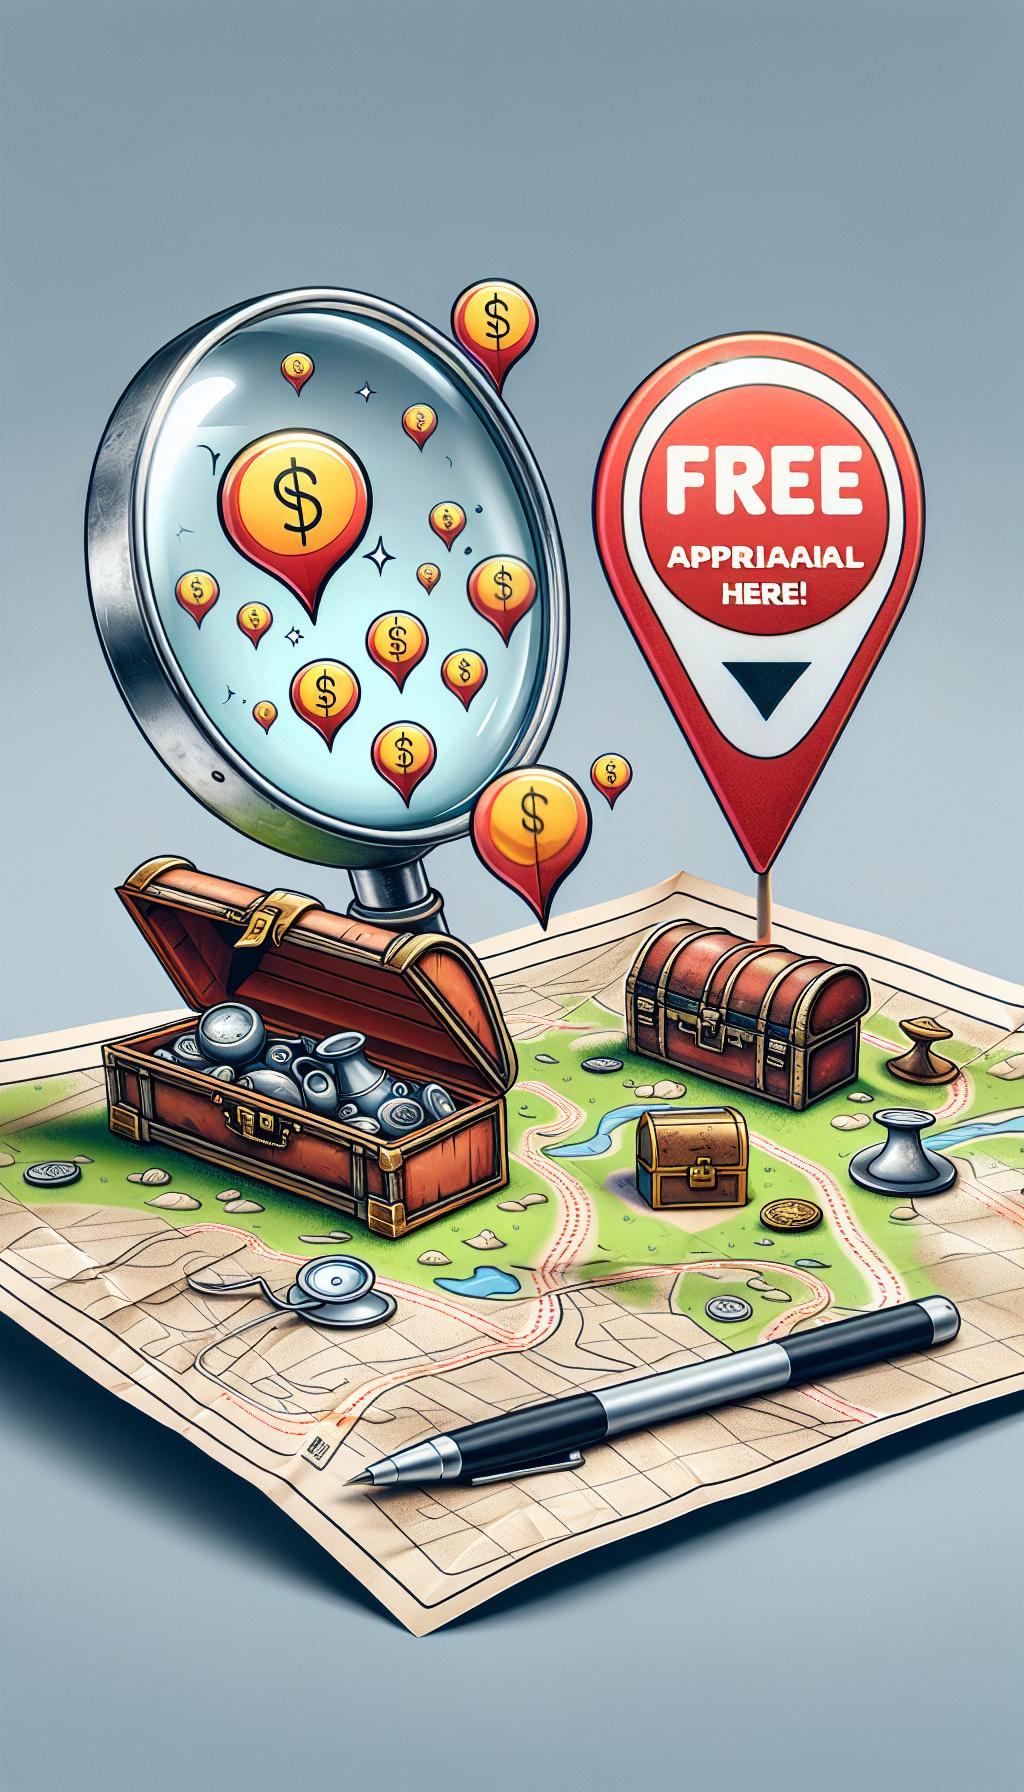 A whimsical illustration displays a giant magnifying glass hovering over an antique-filled treasure chest, with cartoon-styled valuation tags popping up like speech bubbles, all marked "$0". In the foreground, a map pin labeled 'Free Appraisal Here!' stands on a folded road map indicating the heirloom's journey to evaluation. A diverse mix of artistic styles, from the map's minimalism to the chest's fine detail, unifies the image's theme.